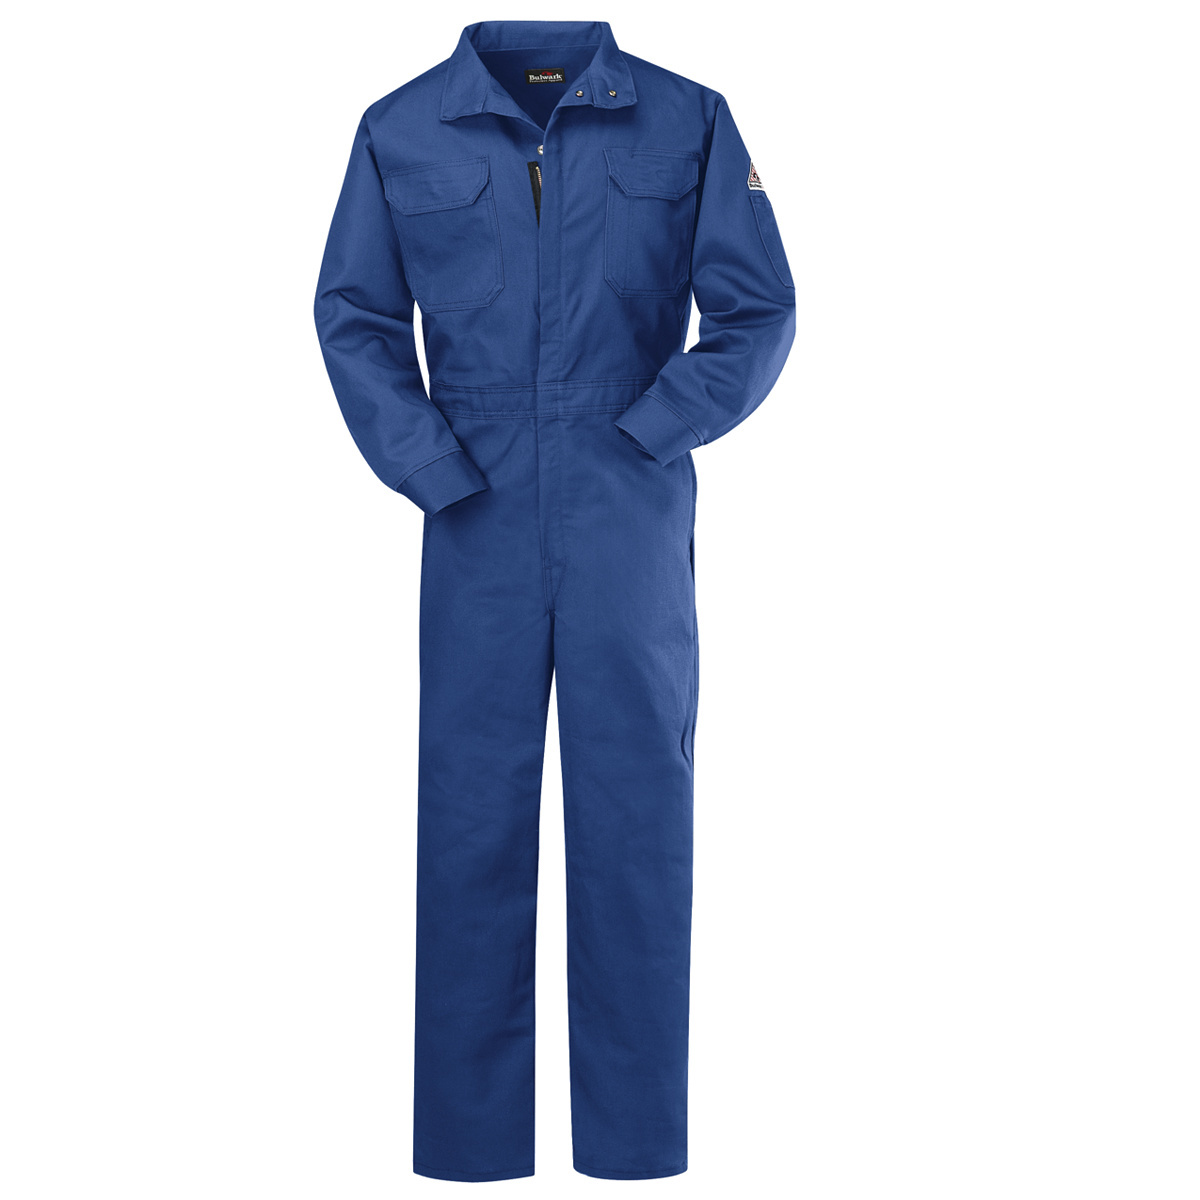 Bulwark® 50 X-Tall Royal Blue Westex Ultrasoft®/Cotton/Nylon Flame Resistant Coveralls With Zipper Front Closure